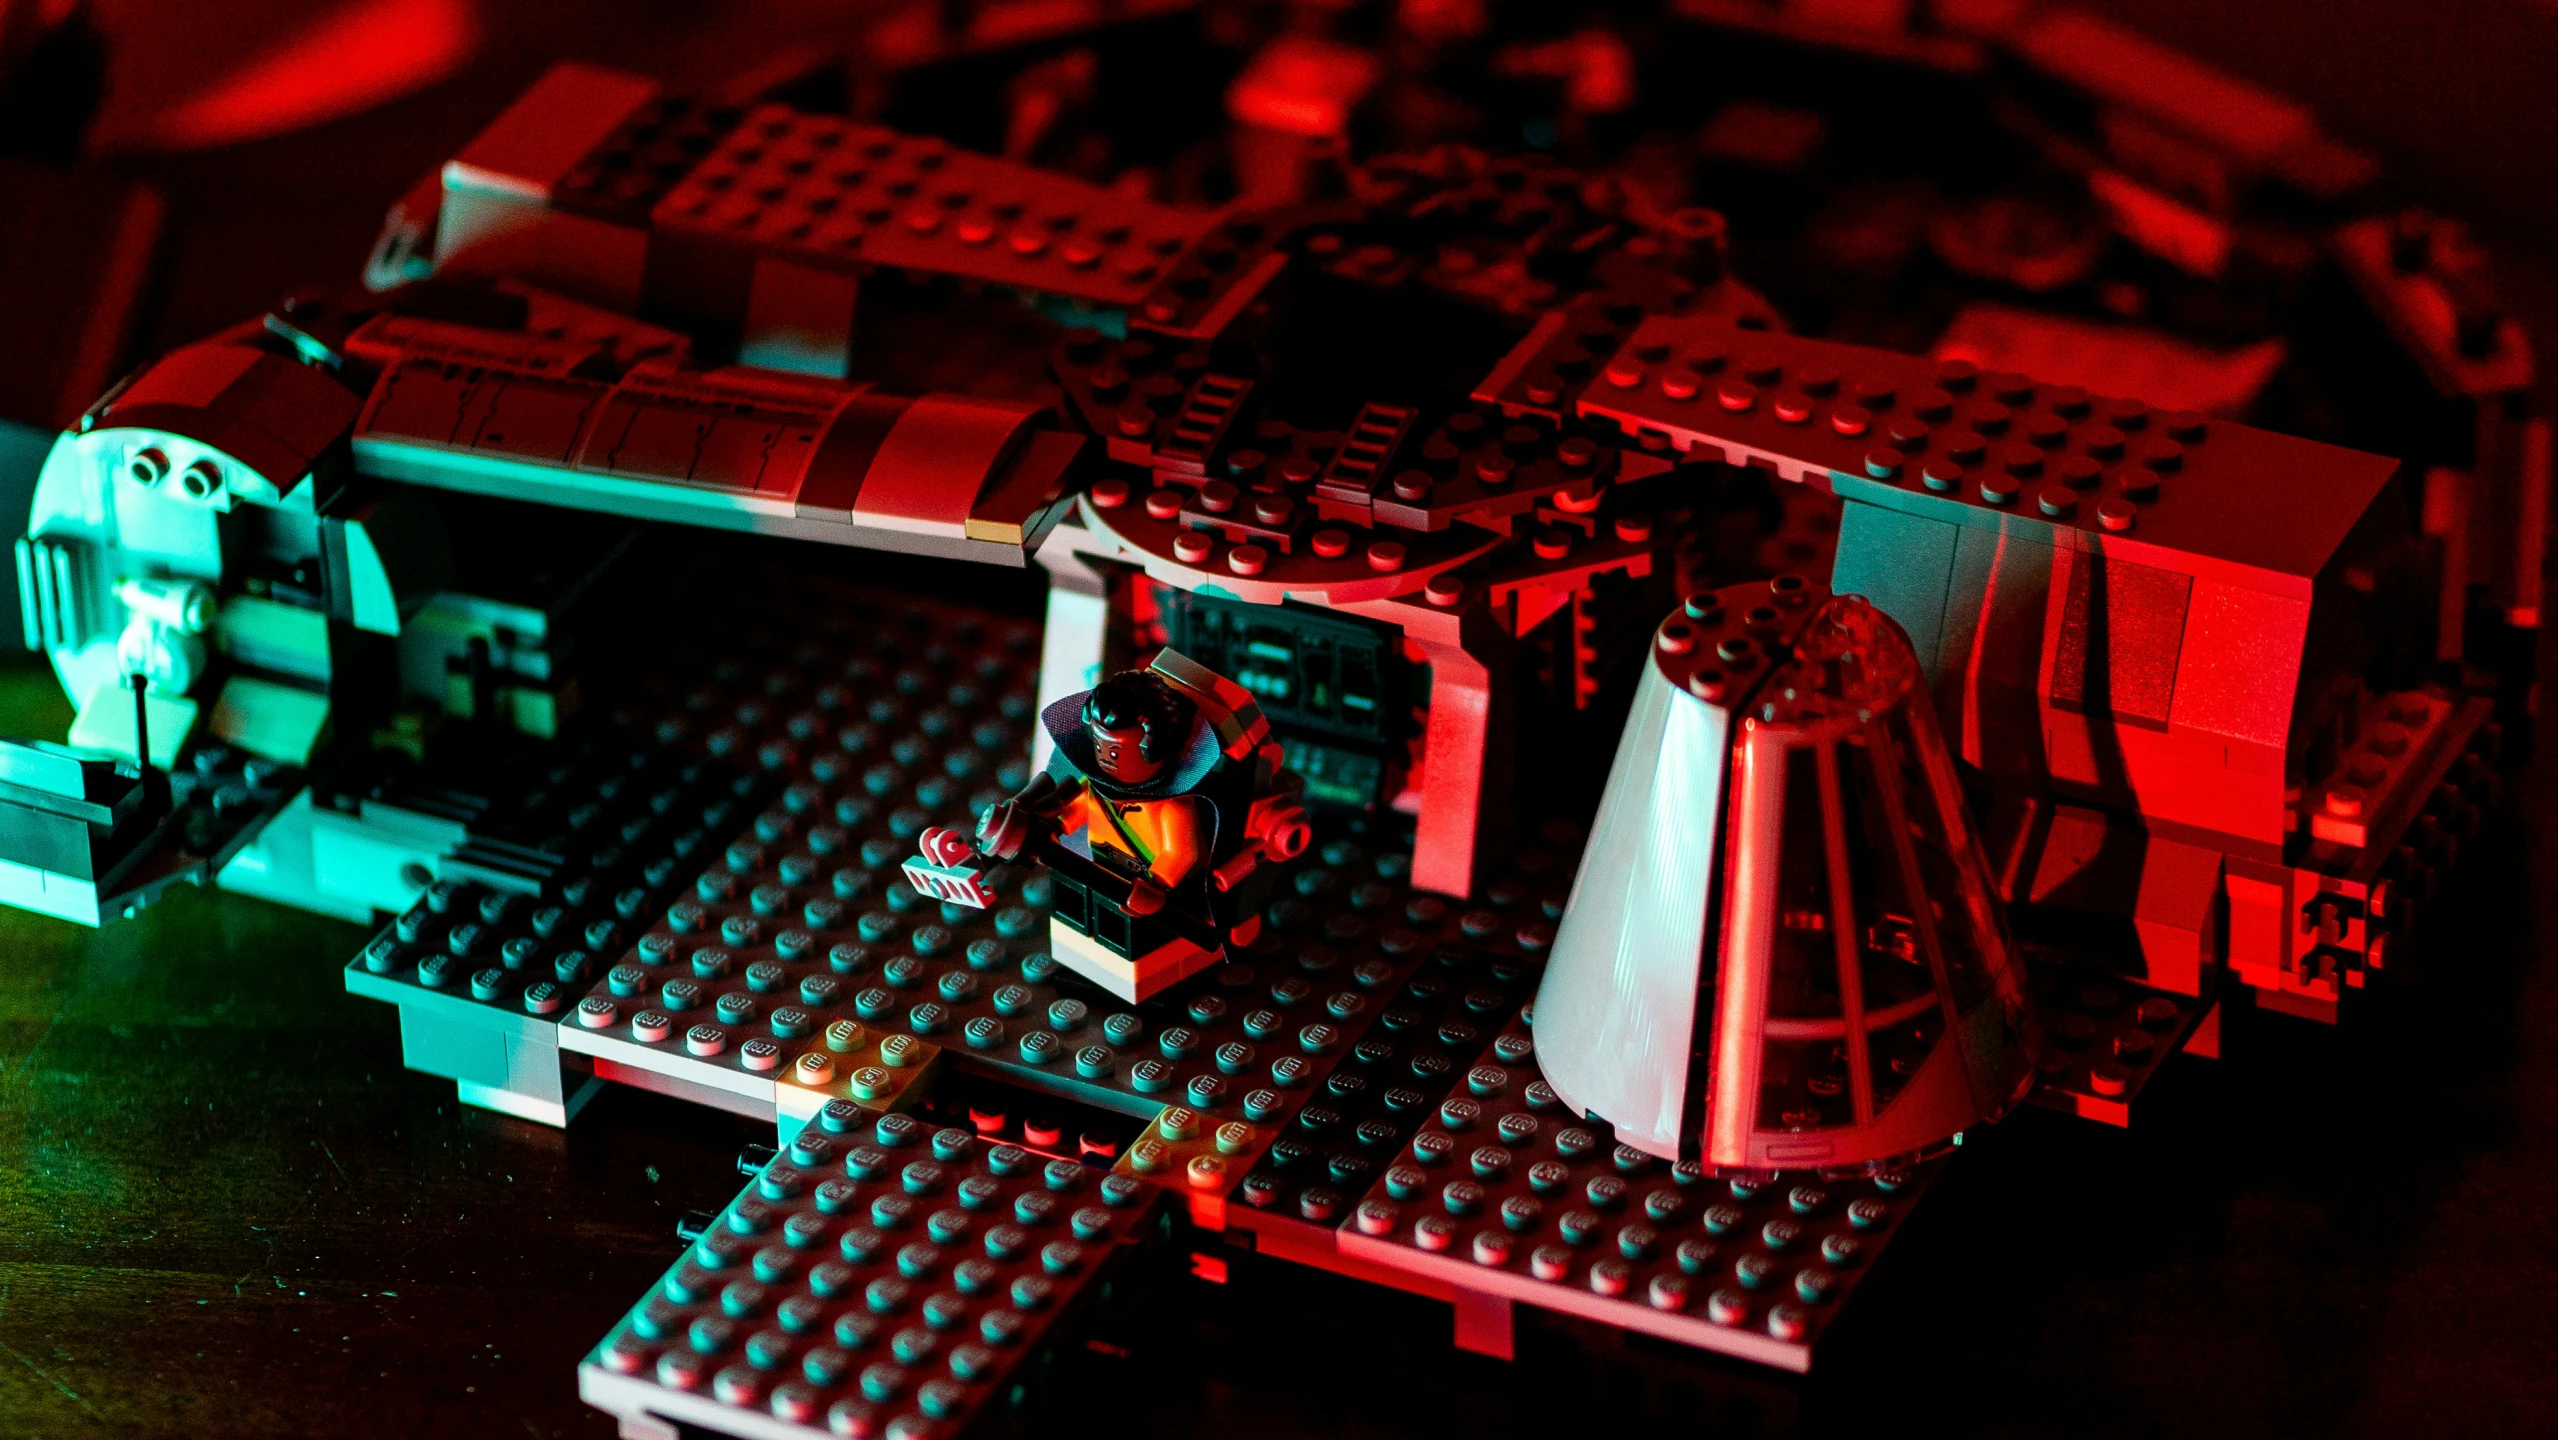 a lego toy has red lights coming from it